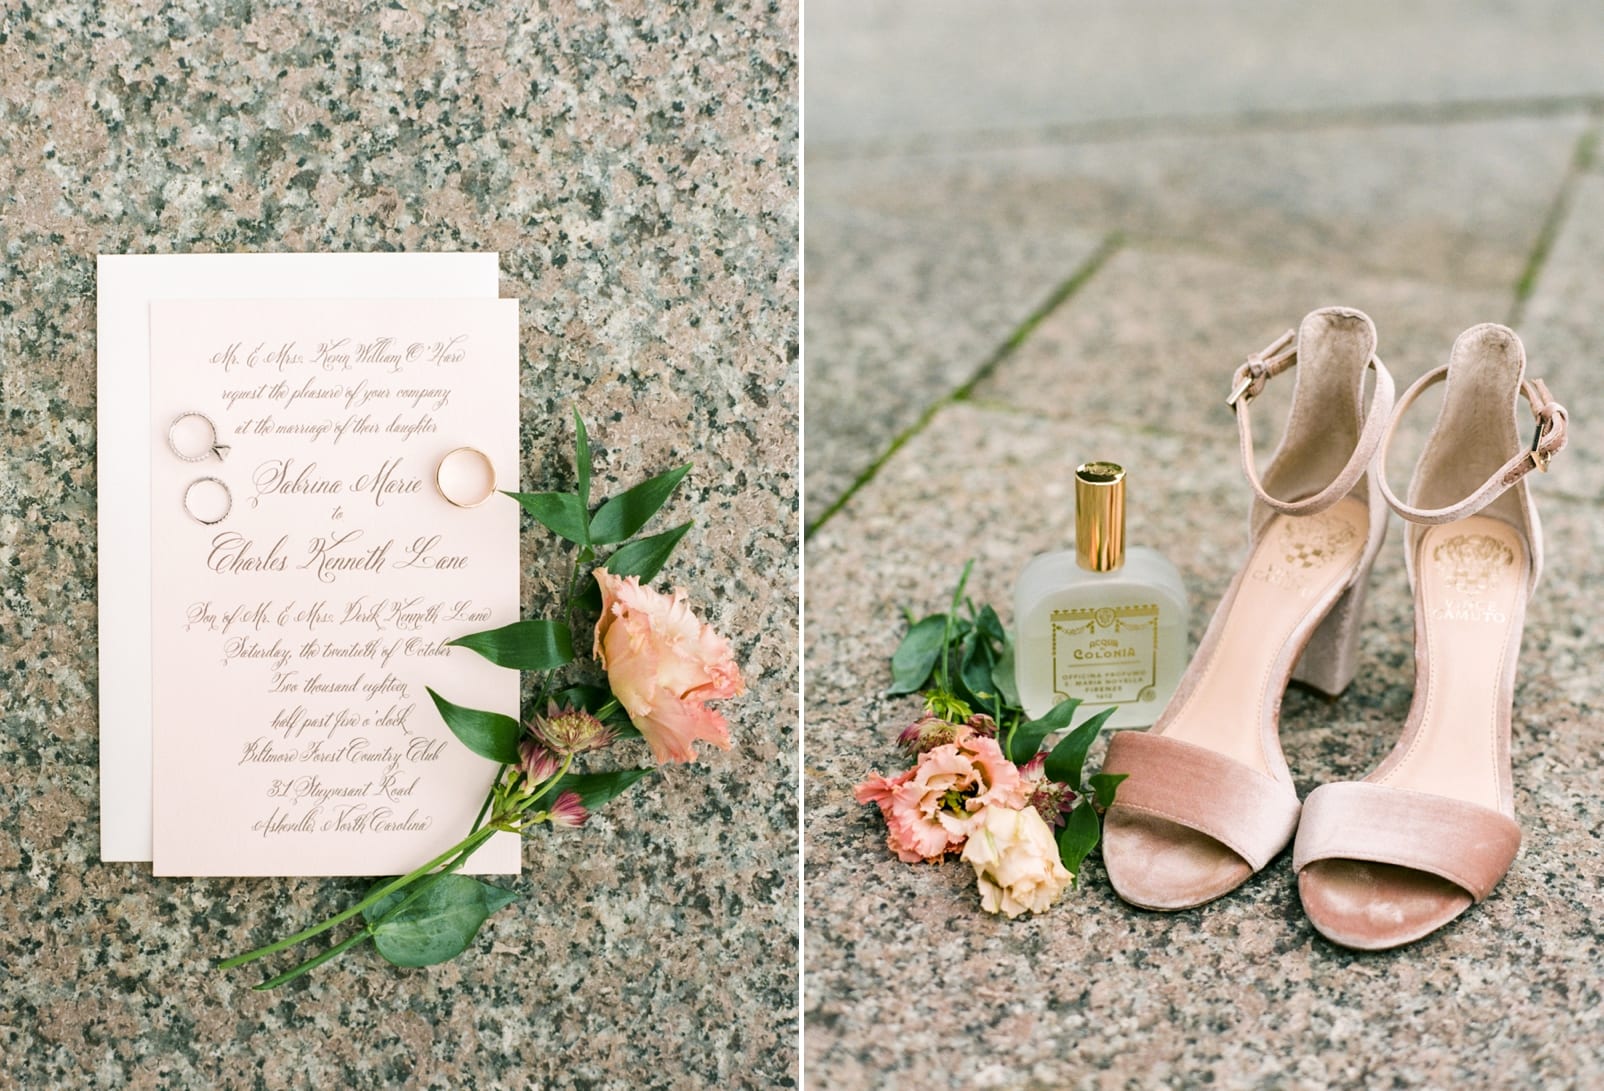 Papersource wedding invitation suite and blush bridal shoes and perfume with fresh flowers photo